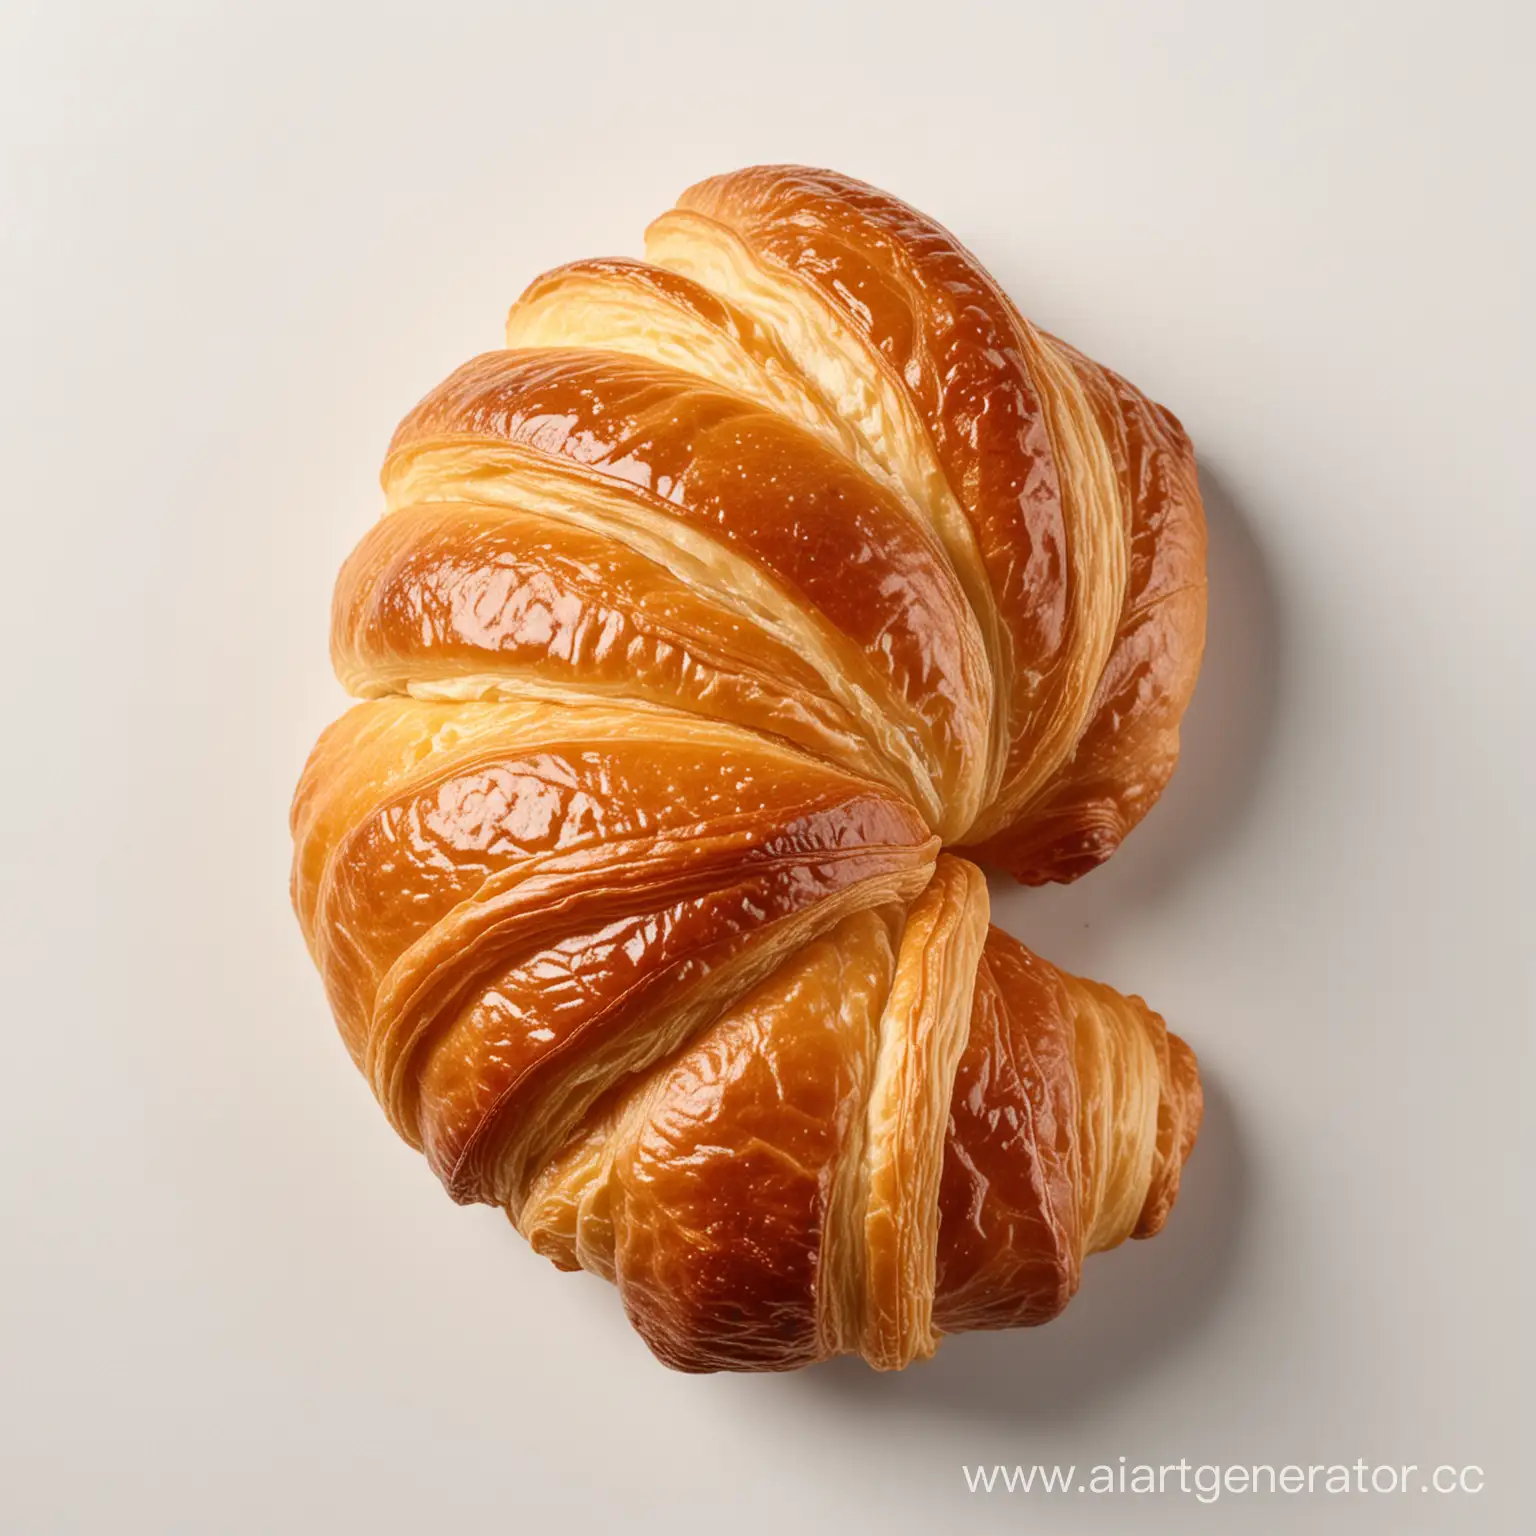 Freshly-Baked-Croissant-on-Clean-White-Background